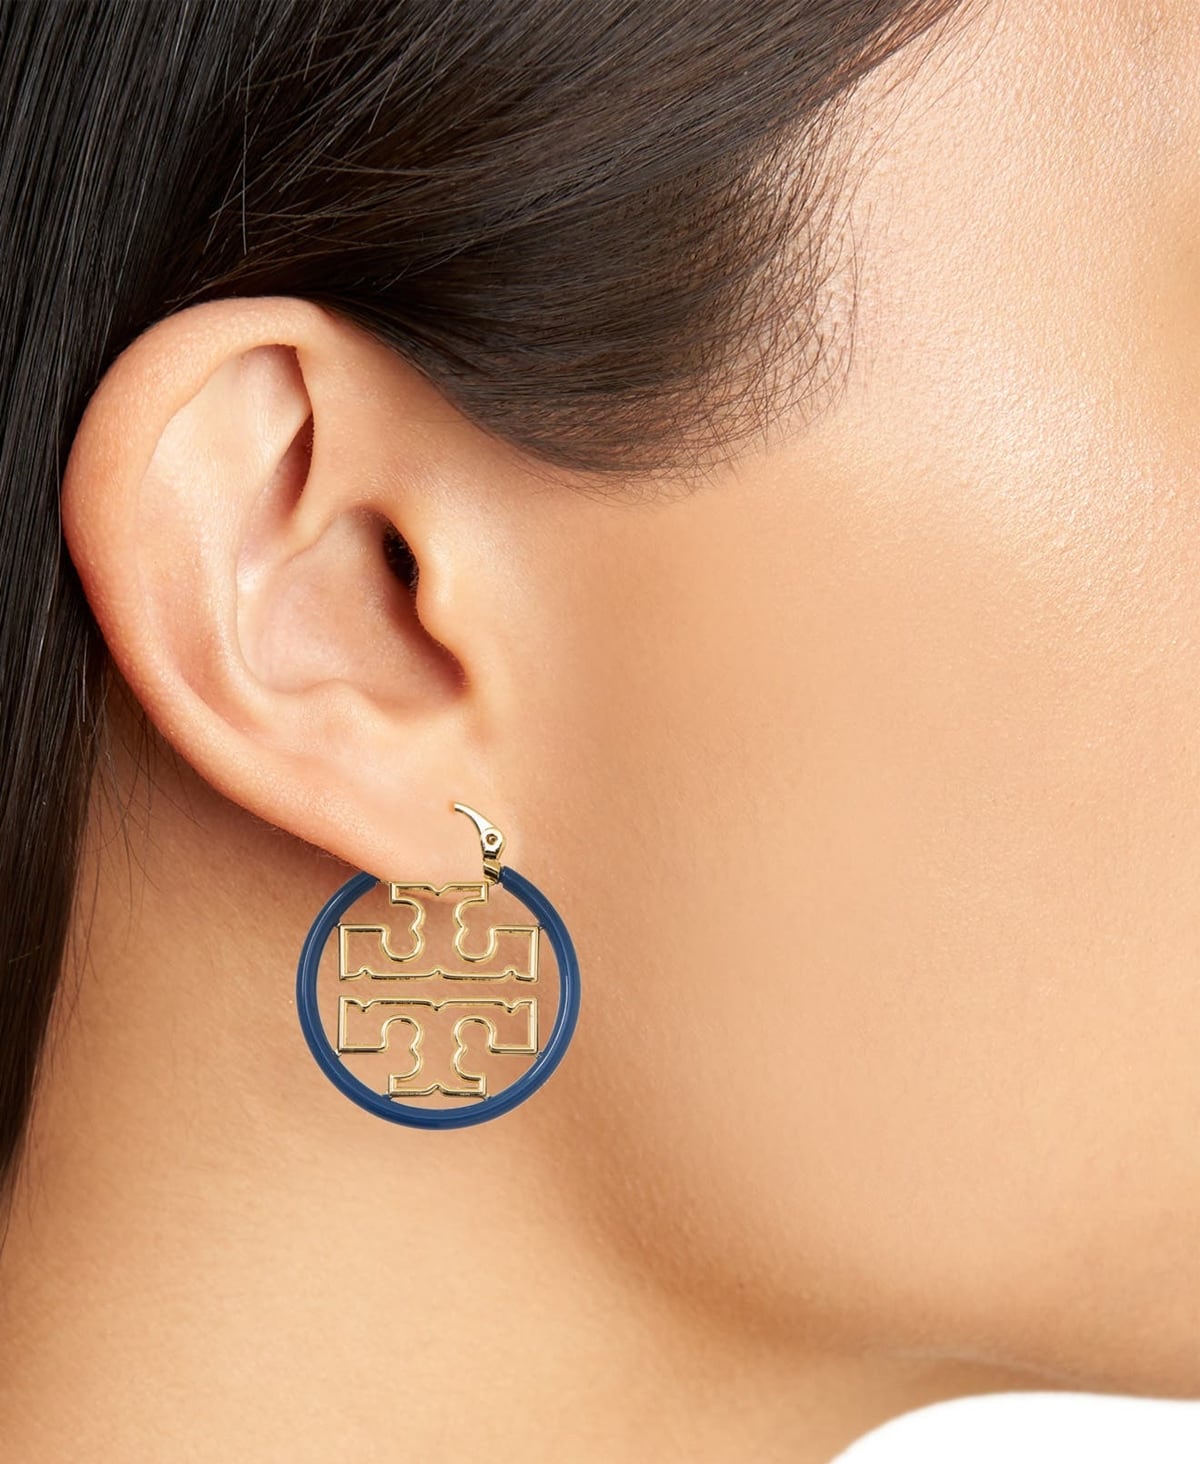 Smooth enamel surrounds glinting double-T logos in these small blue and gold hoop earrings from Tory Burch